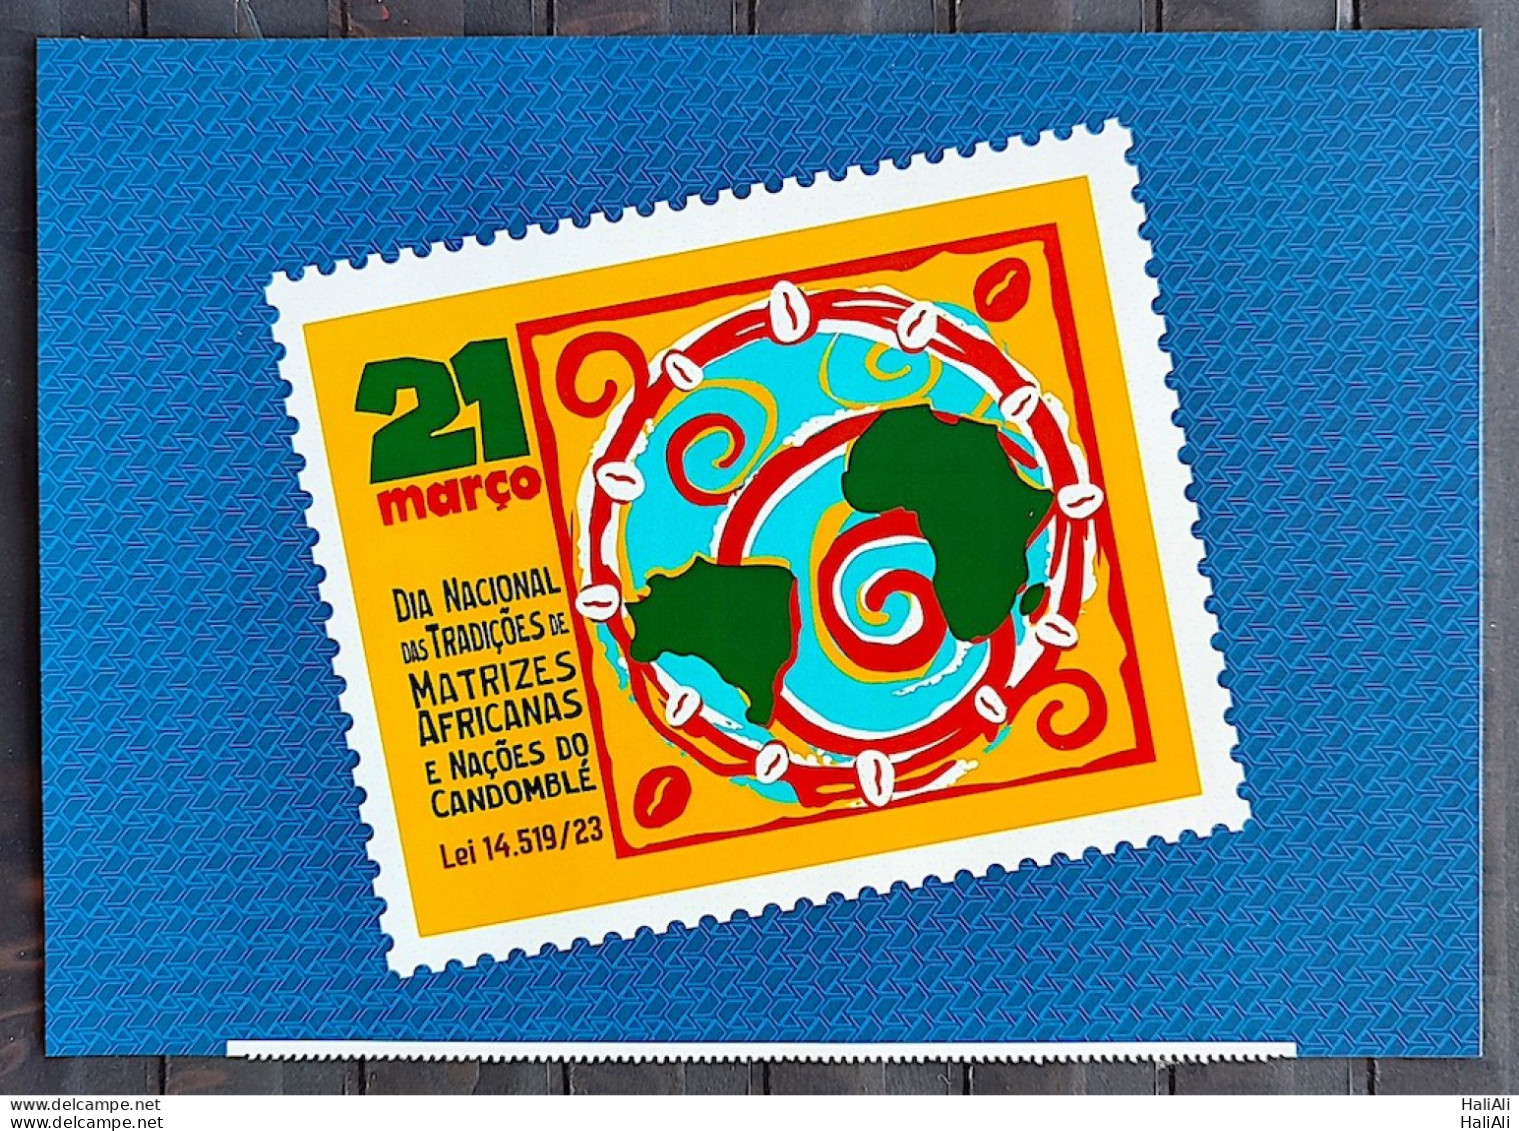 SI 06 Vignette Brazil Institutional Stamp Traditions Of African Matrices And Candomble Nations Map 2023 - Gepersonaliseerde Postzegels